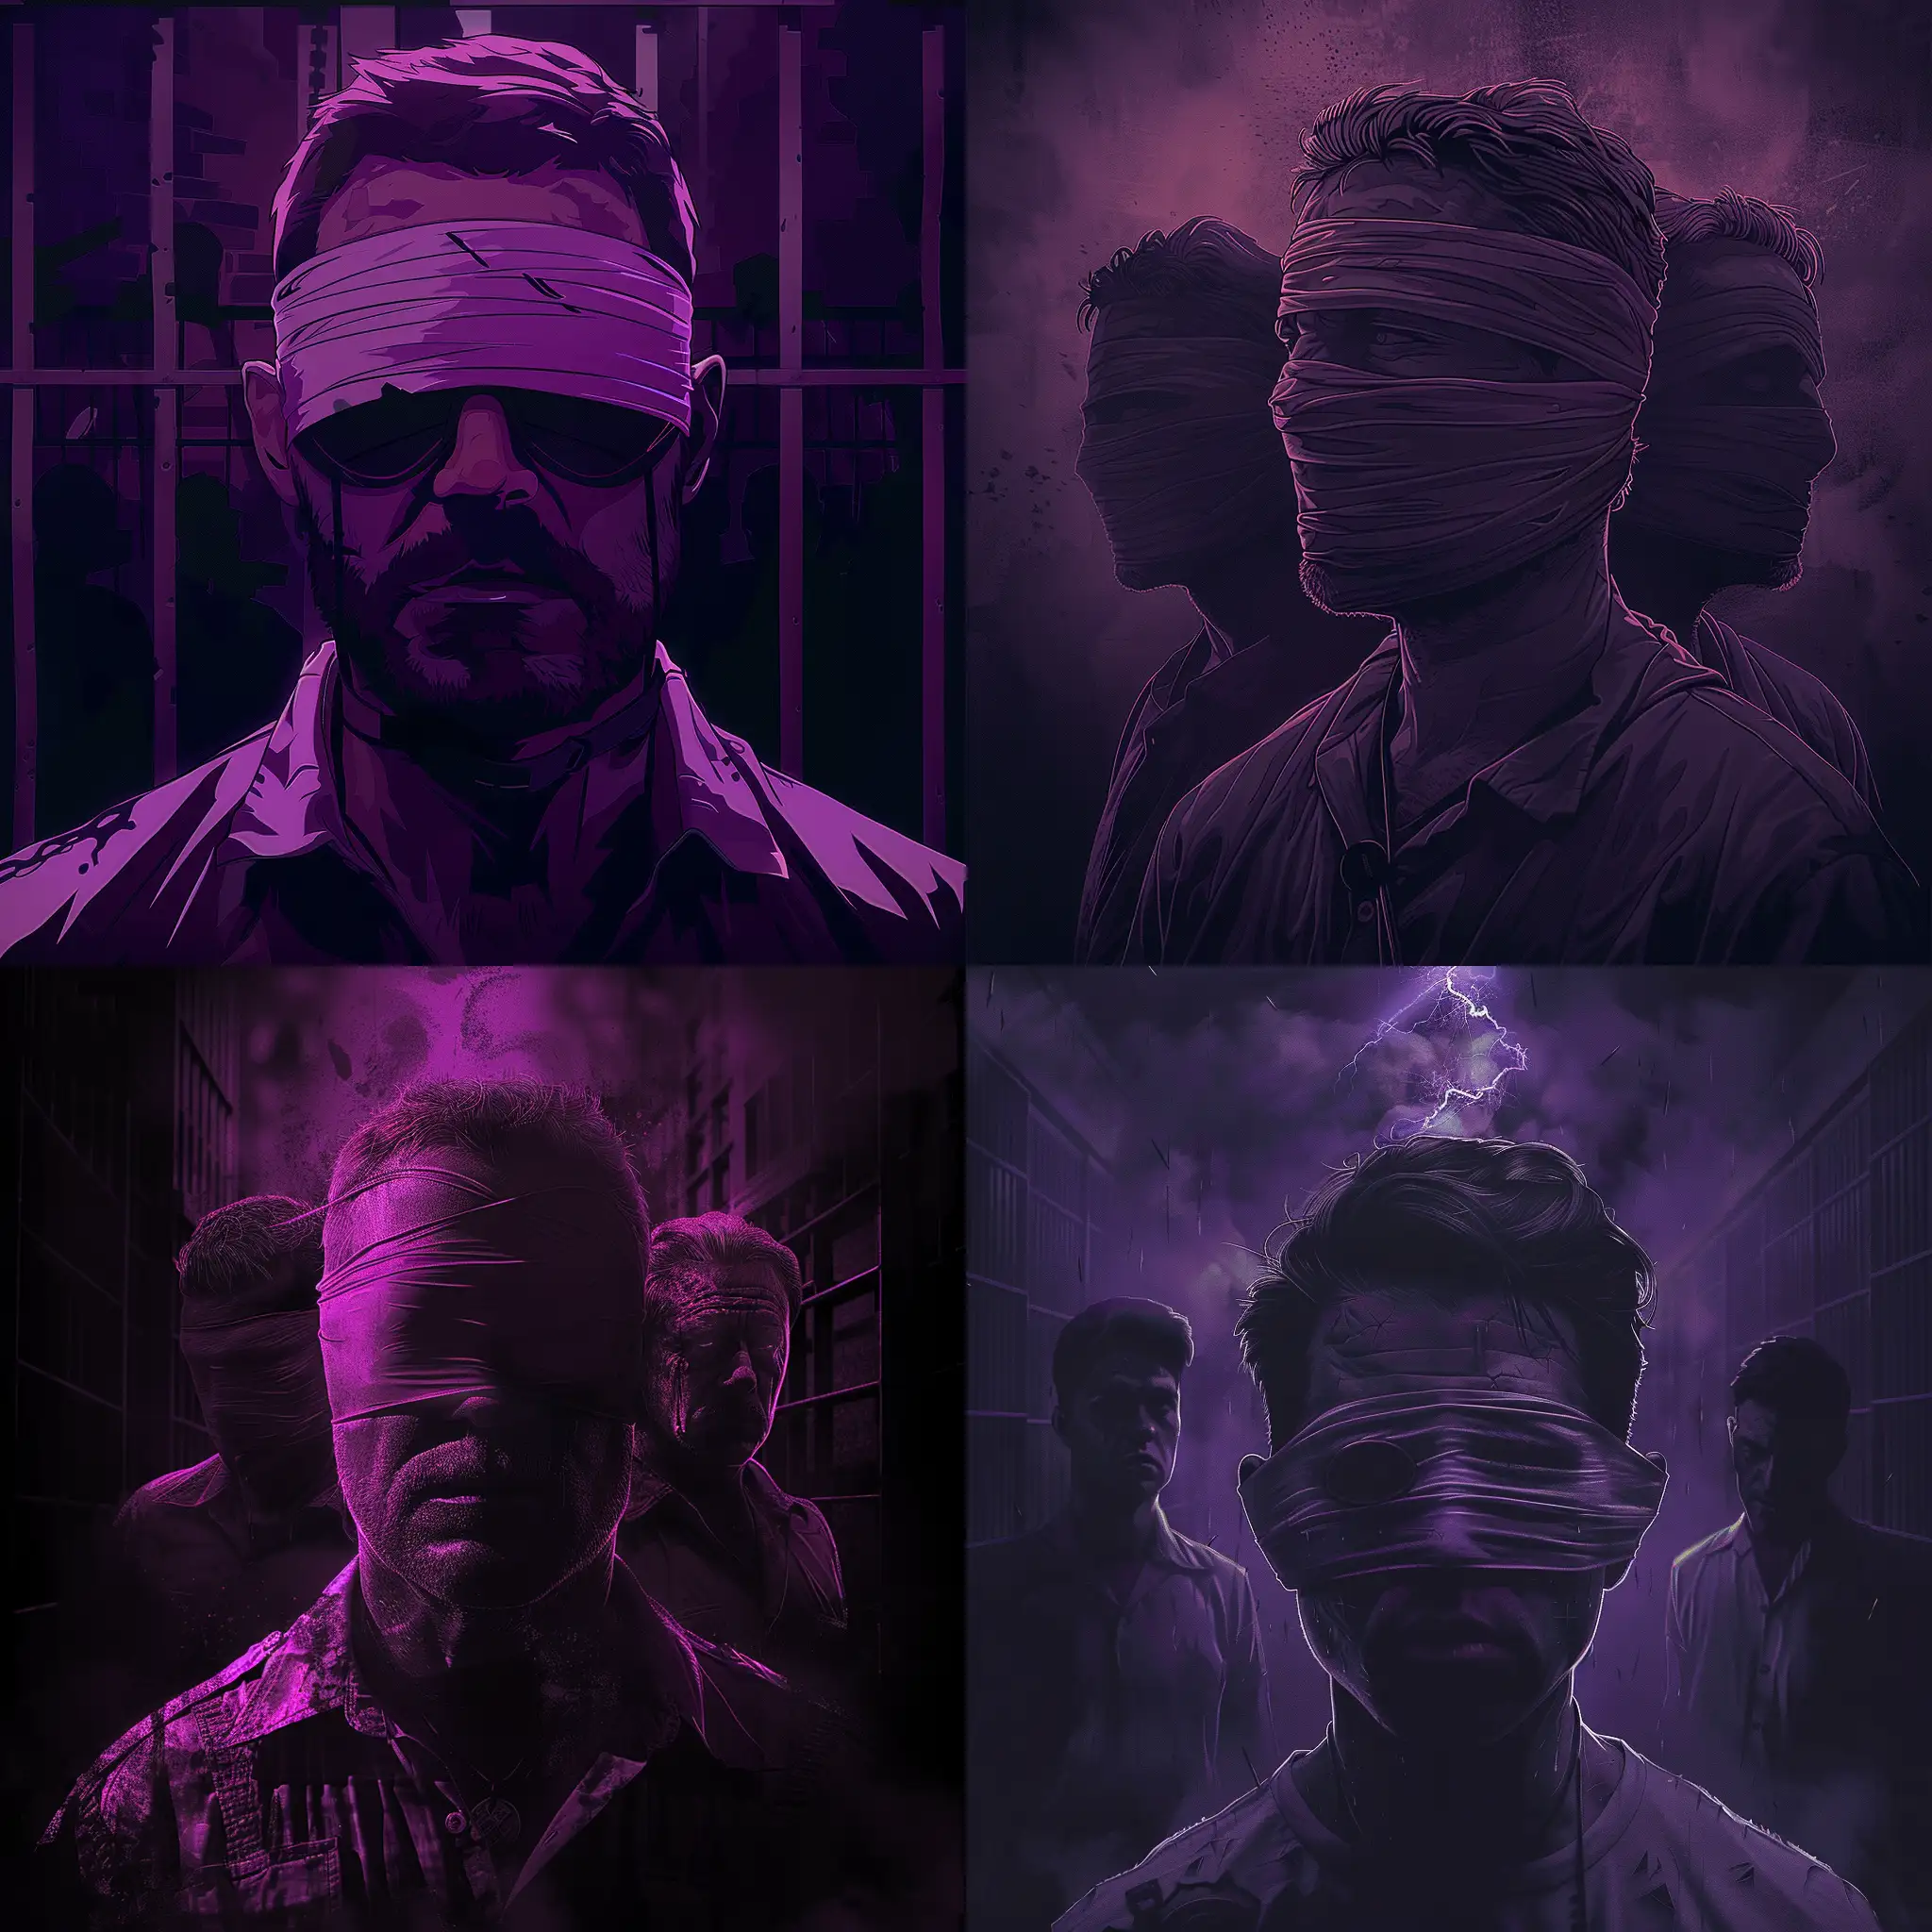 A blindfolded man with a serious expression, the background is dark, he appears to be in a prison Digital art style with a purple tone with high detail in a cartoon-like style, soft lighting, movie poster, digital art, 3 mafia mans,. A dark atmosphere is depicted.--ar 16:9 --v 6.0